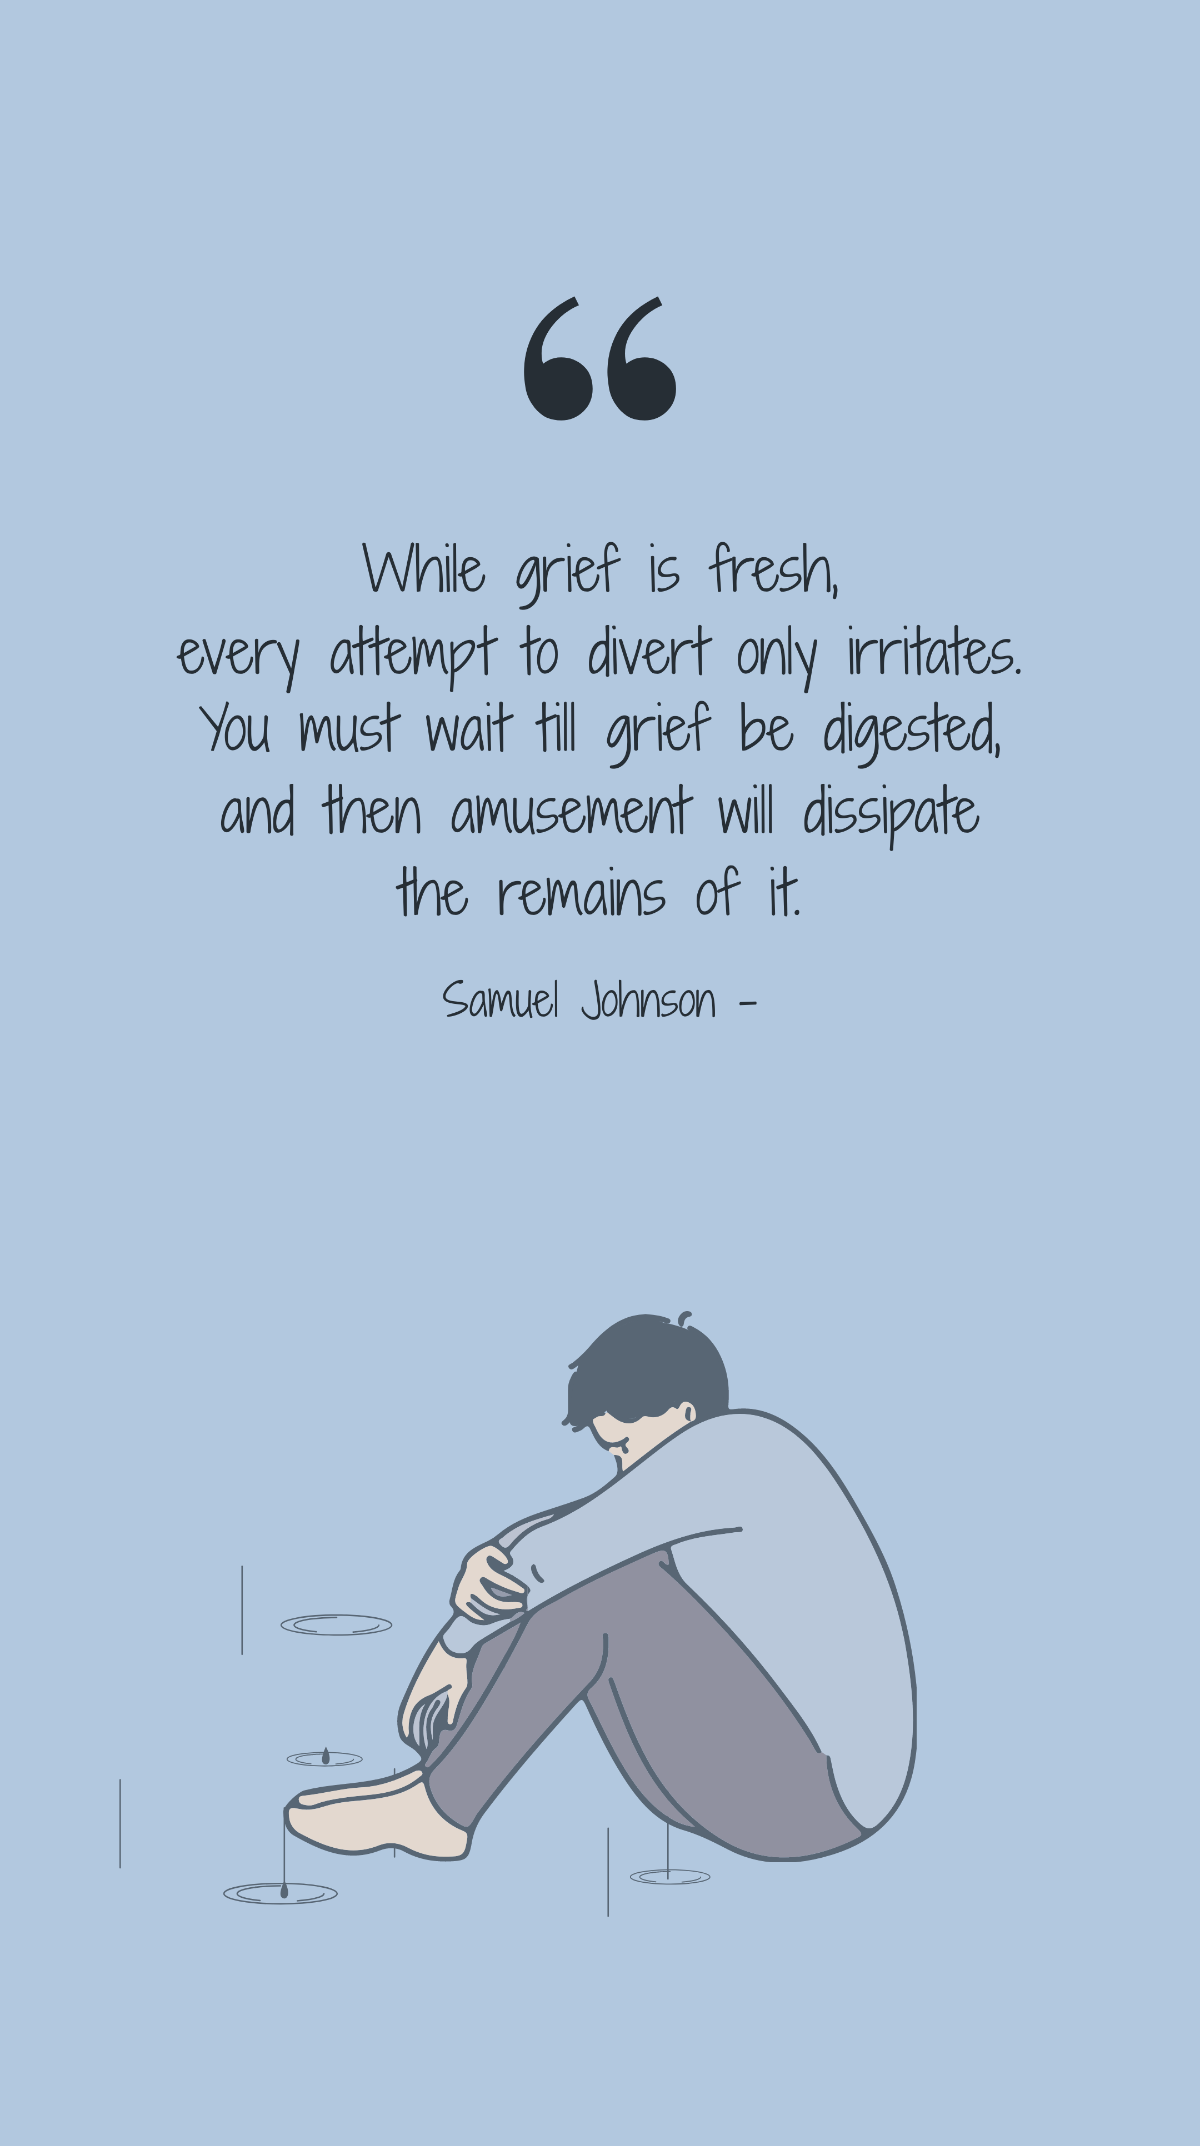 Samuel Johnson - While grief is fresh, every attempt to divert only irritates. You must wait till grief be digested, and then amusement will dissipate the remains of it. Template